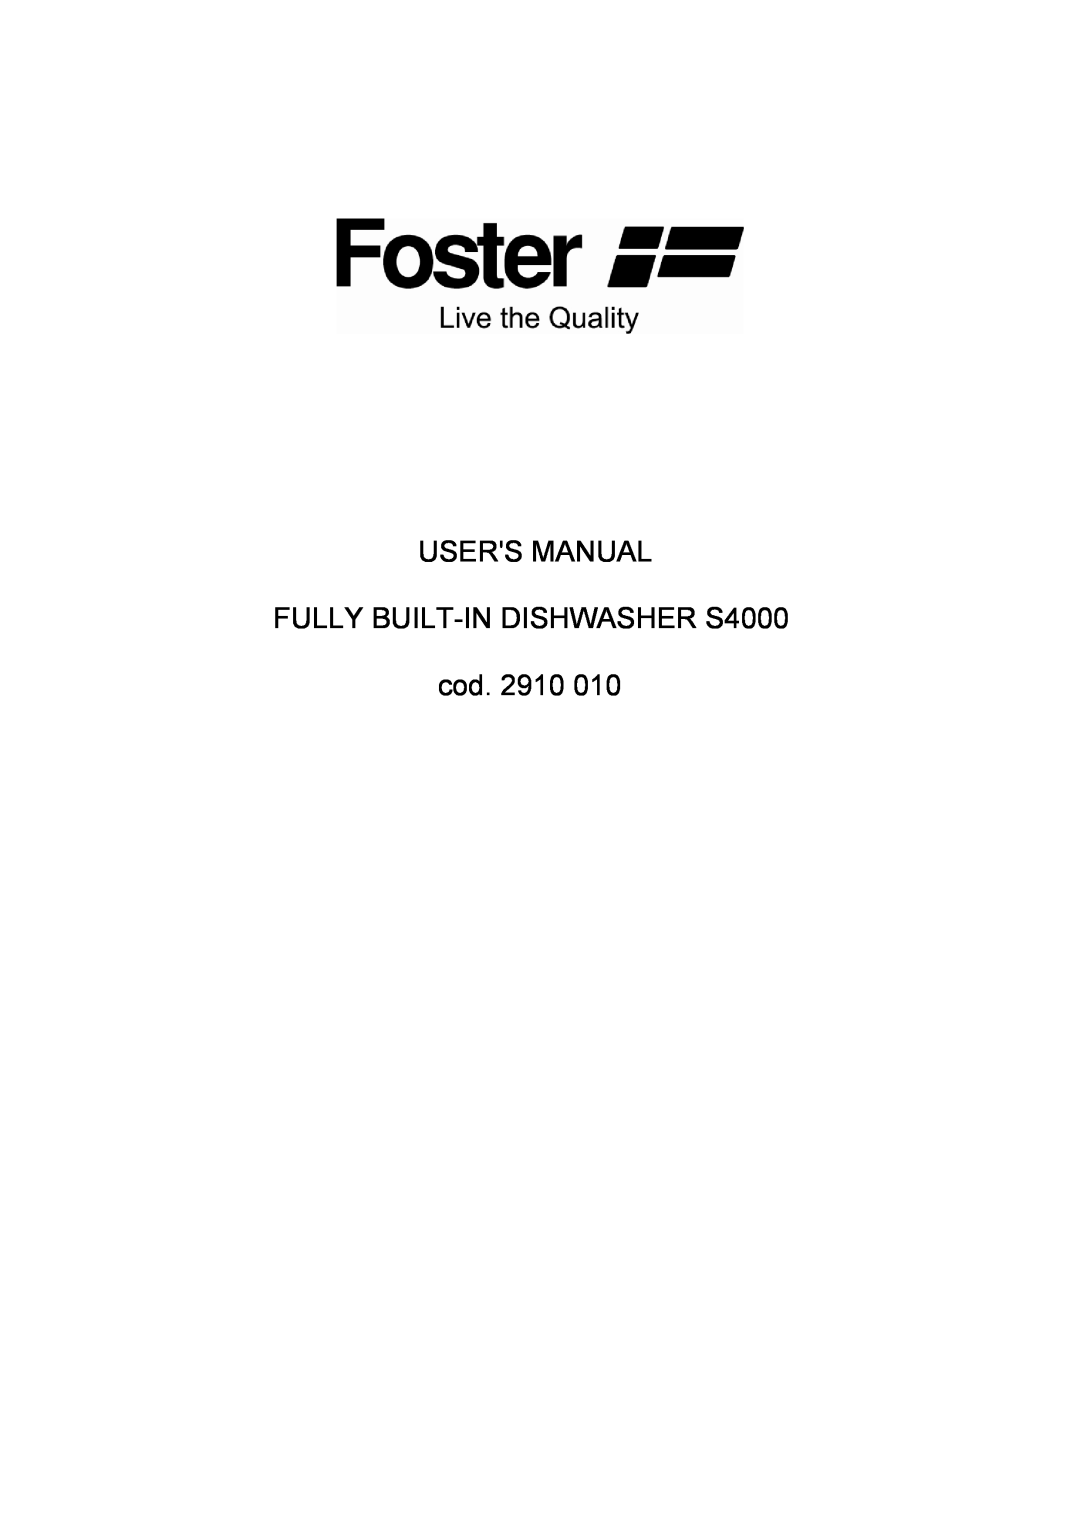 Foster user manual Users Manual For Built-In Oven, Multifunction steam S4000, cod. 7135, Foster spa 